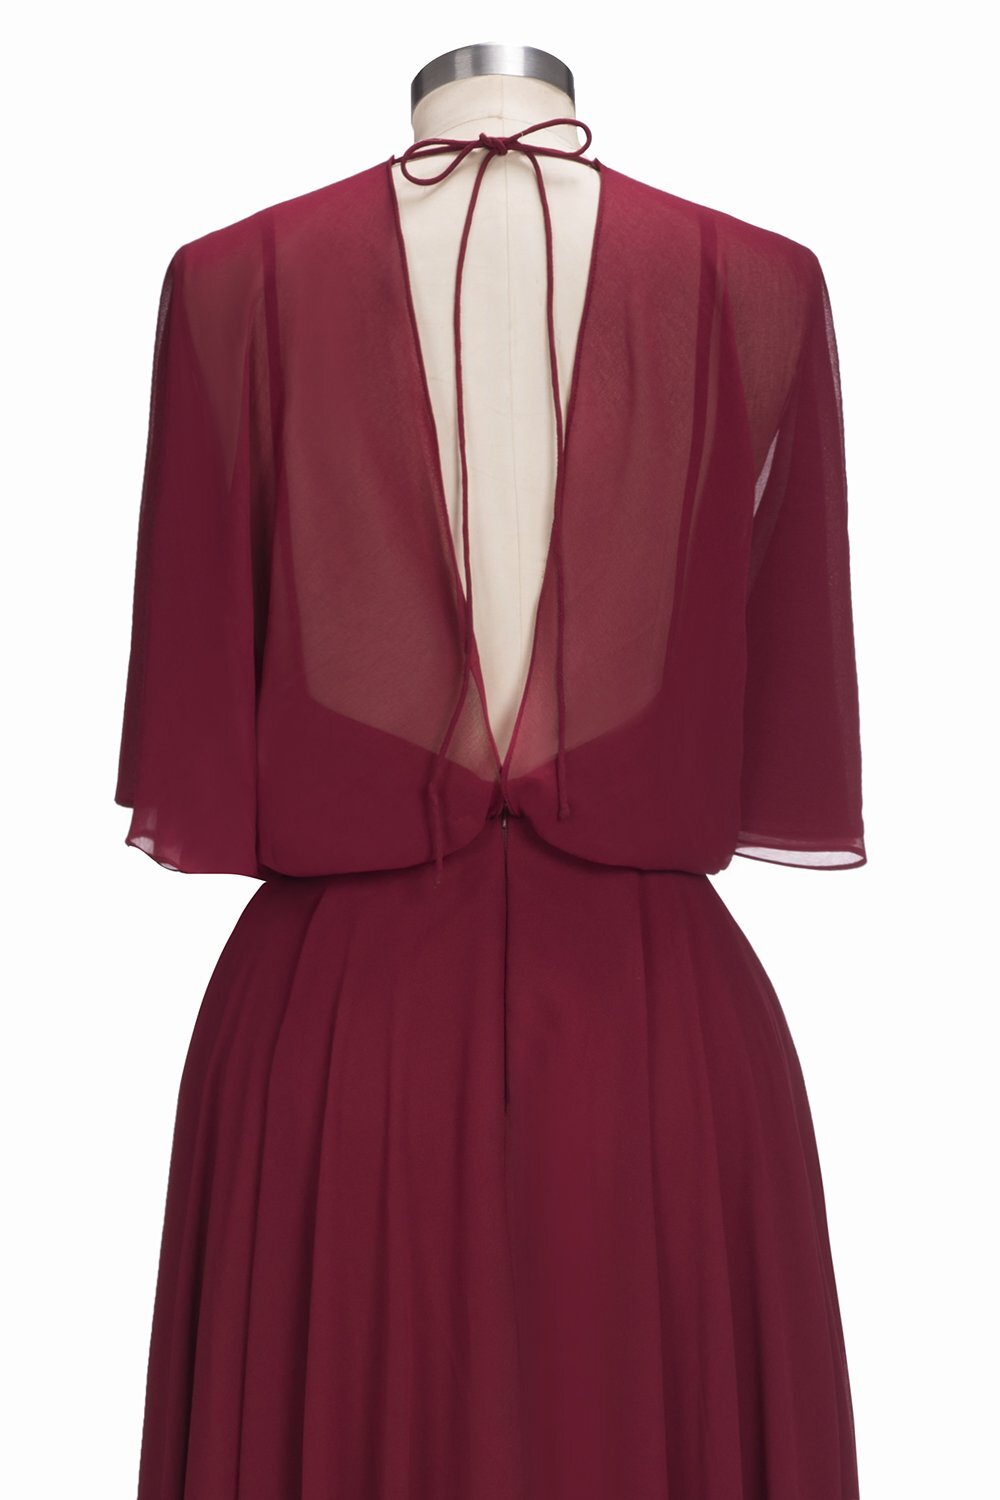 Casual A-line Burgundy Flare Sleeves Long Bridesmaid Dress